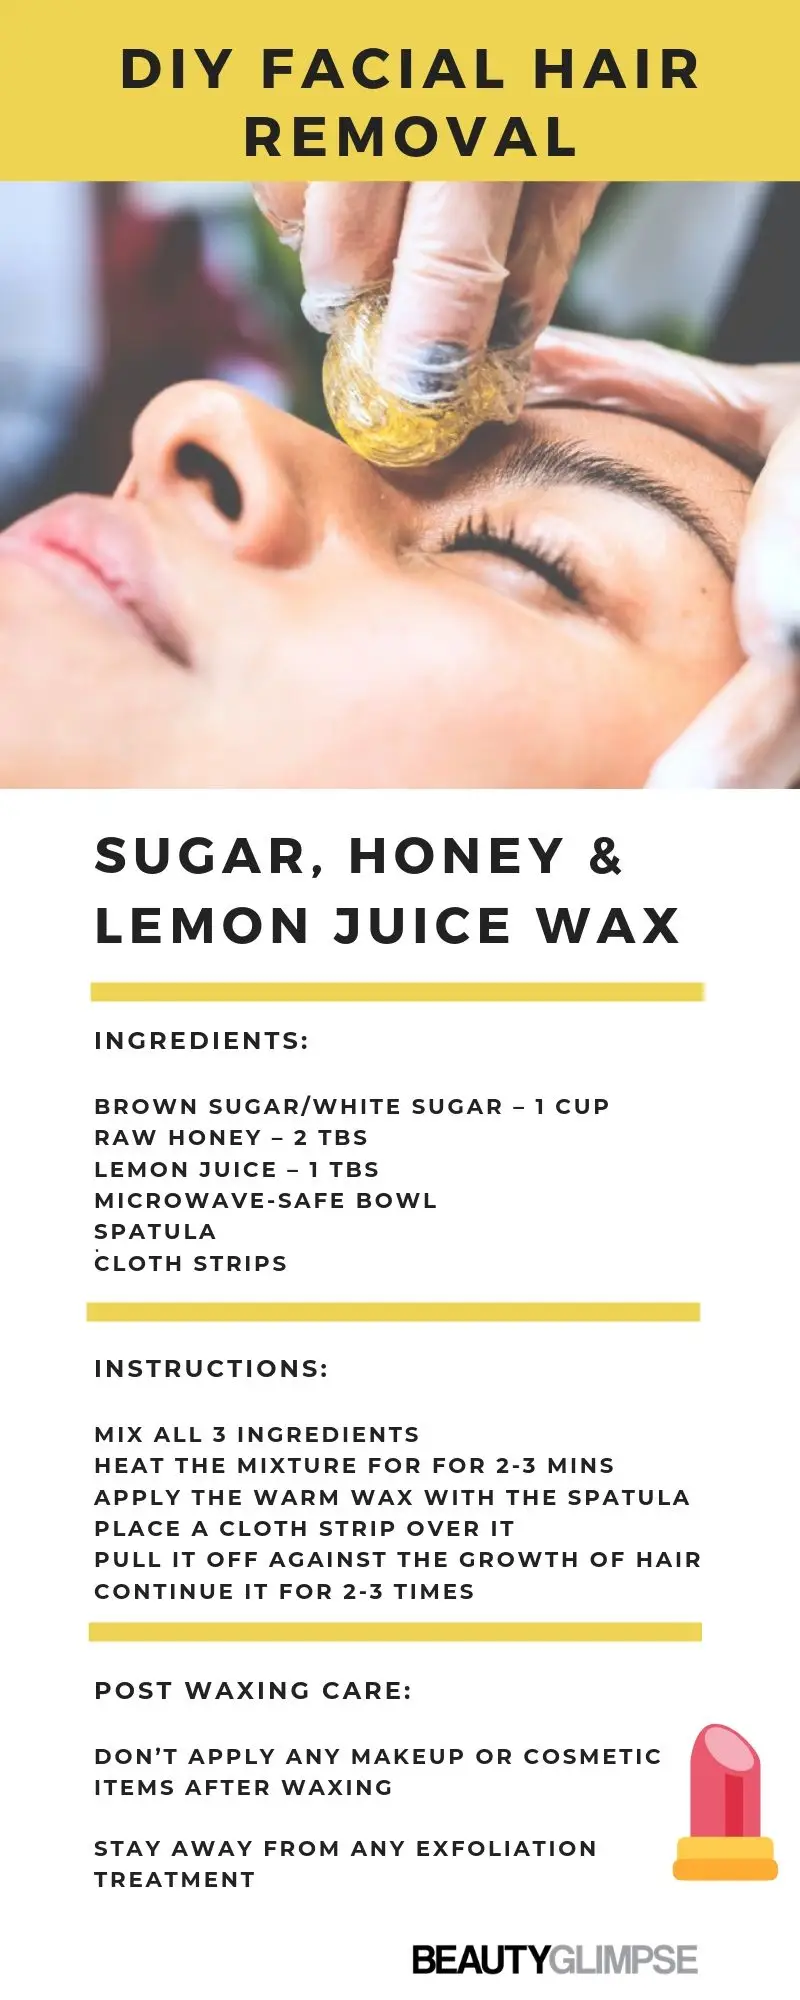 3 Homemade Wax Recipes for Facial Hair Removal Youd Love to